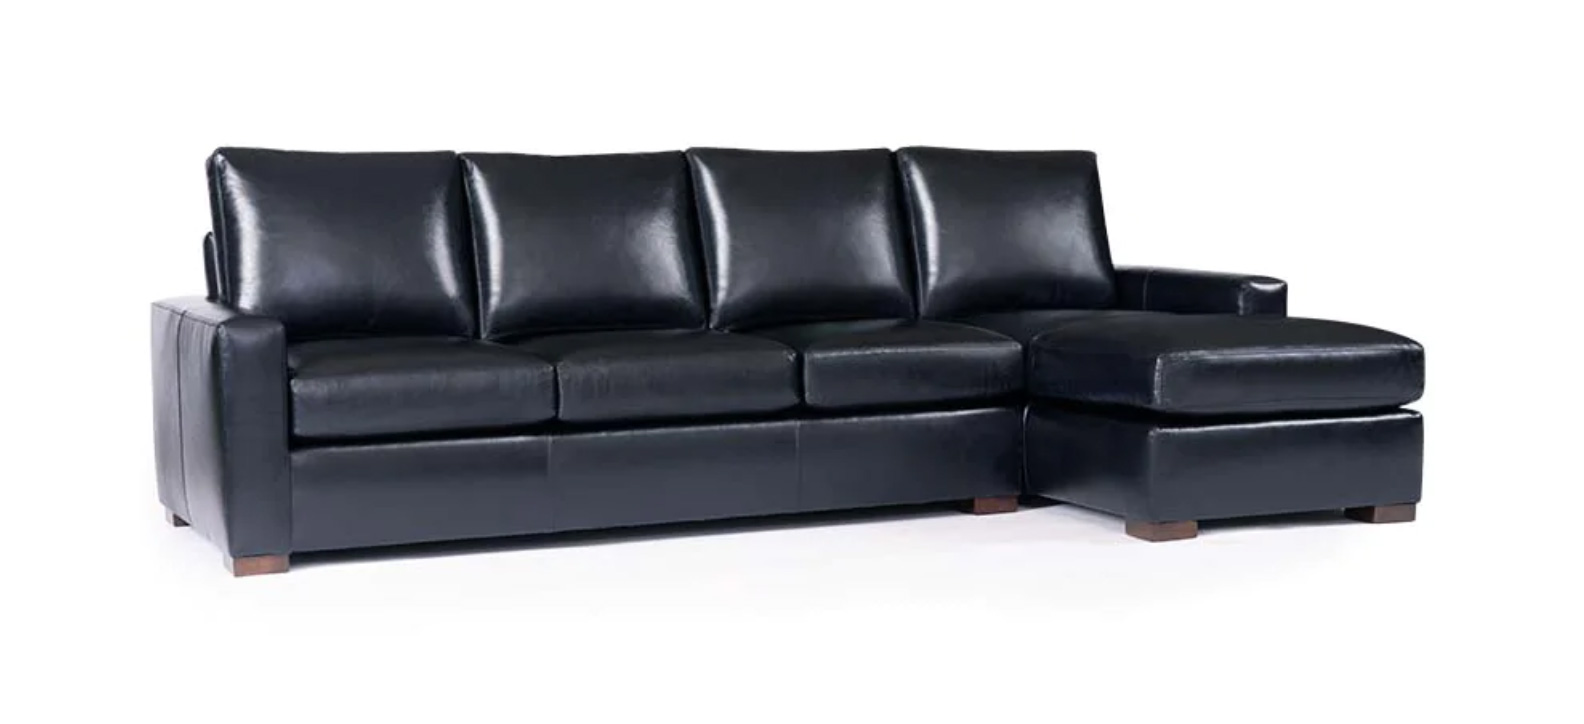 memphis sectional chaise